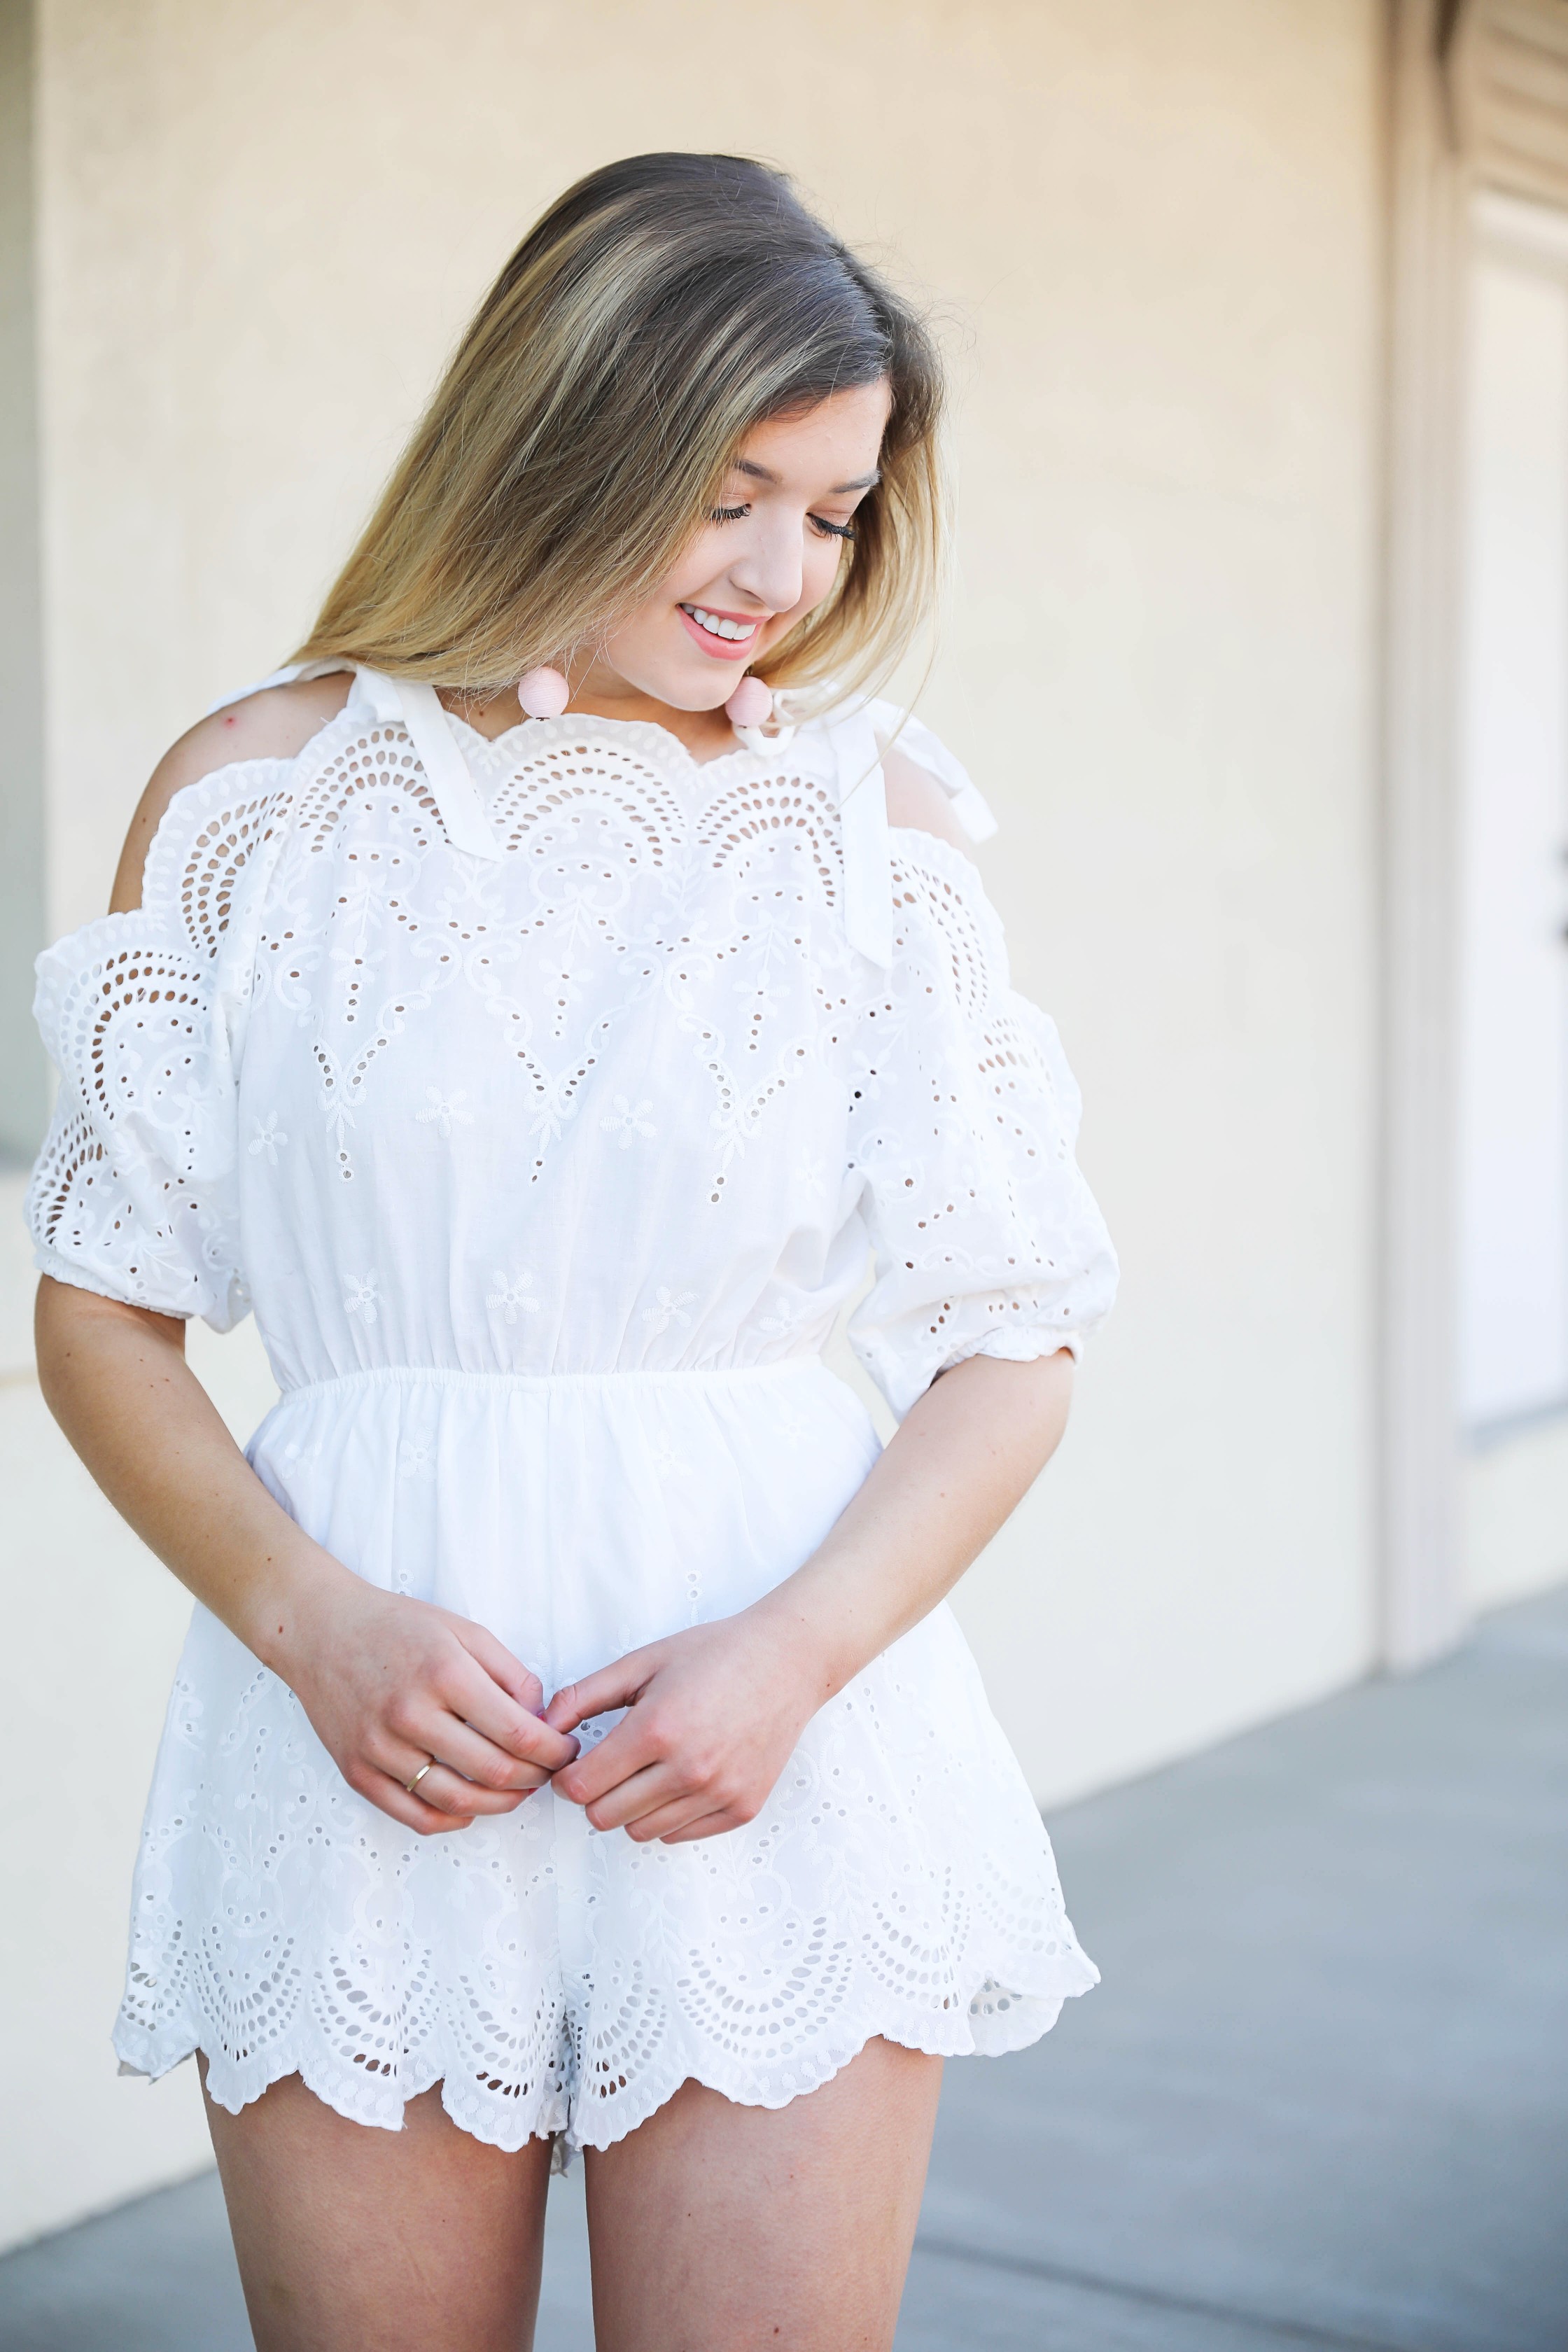 Scalloped romper from Hello Molly! Perfect outfit for valentine's day! Cute white romper for spring or summer! Get the details on daily dose of charm by lauren lindmark